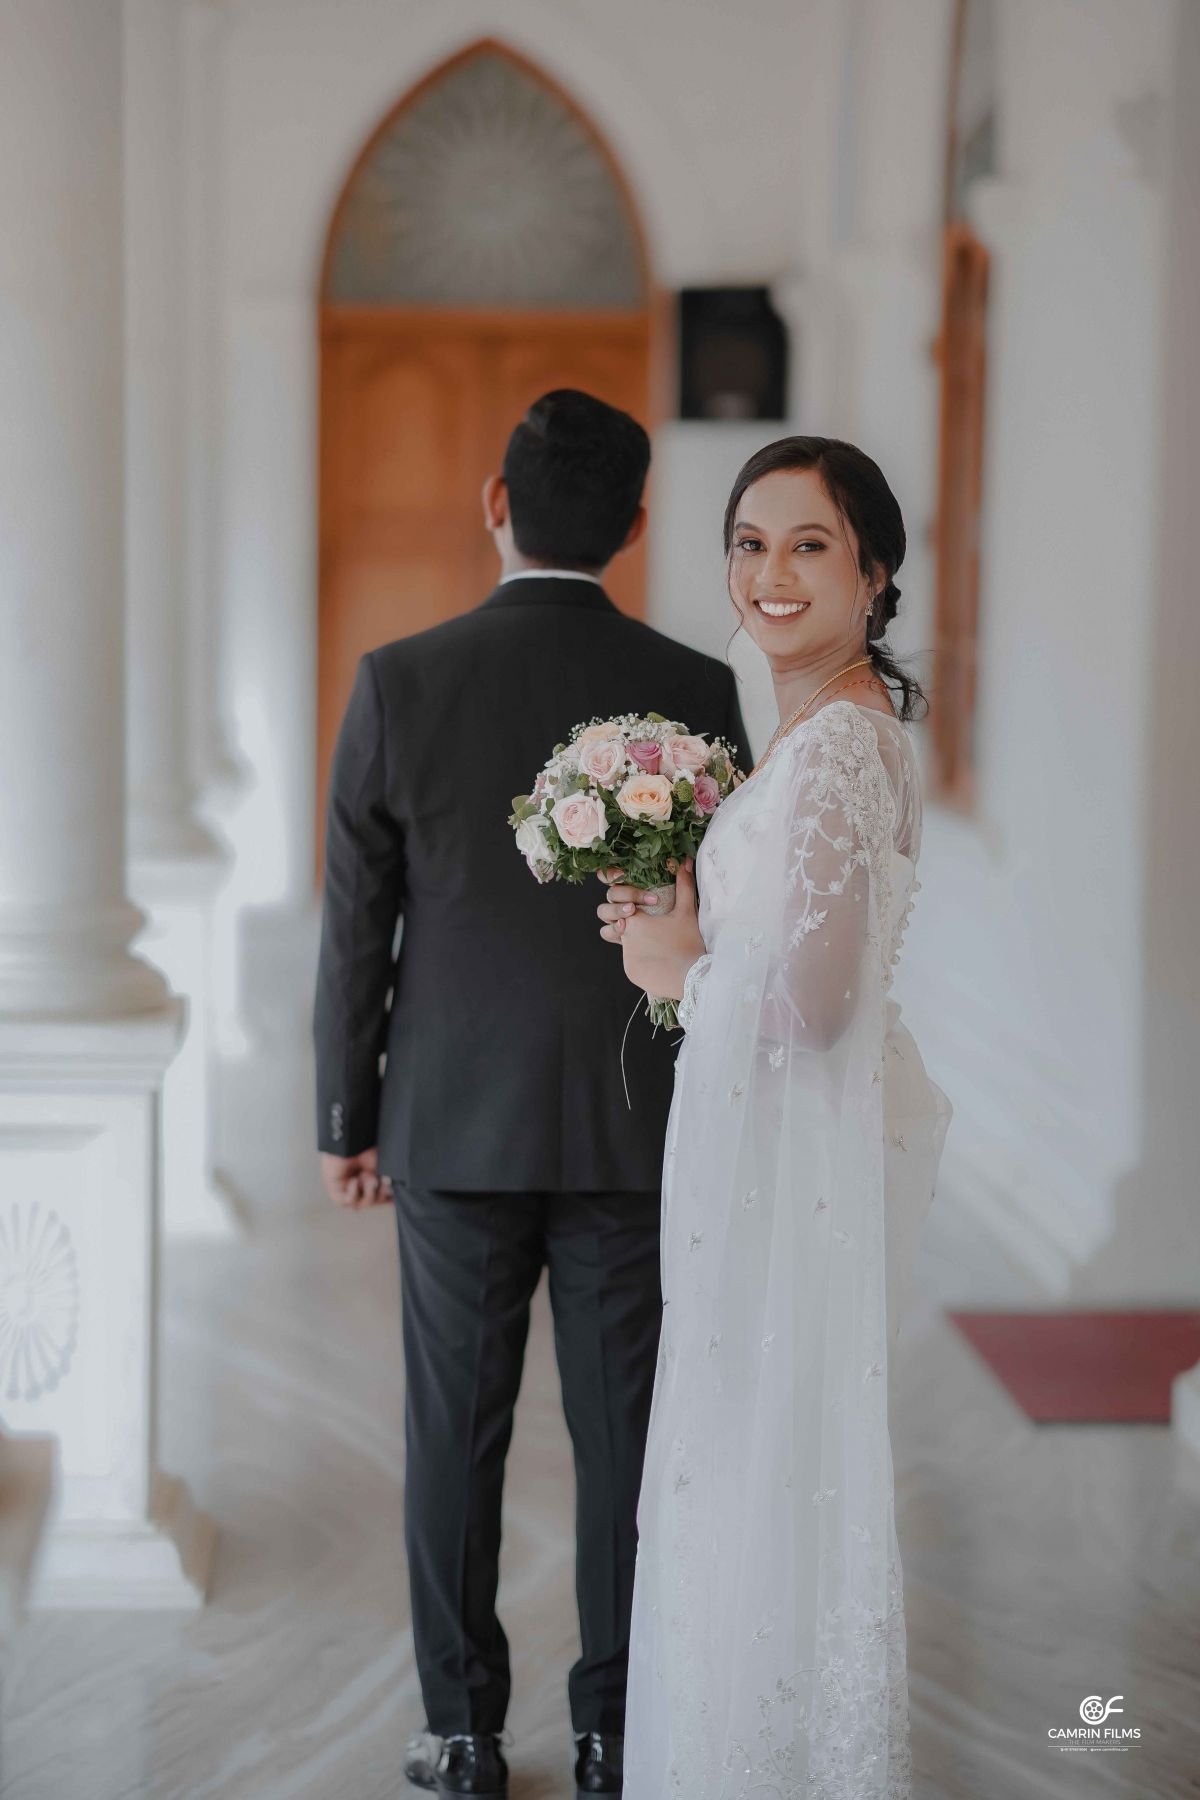 Discover The Beauty Of Faith-filled Weddings In Our Christian Venues.